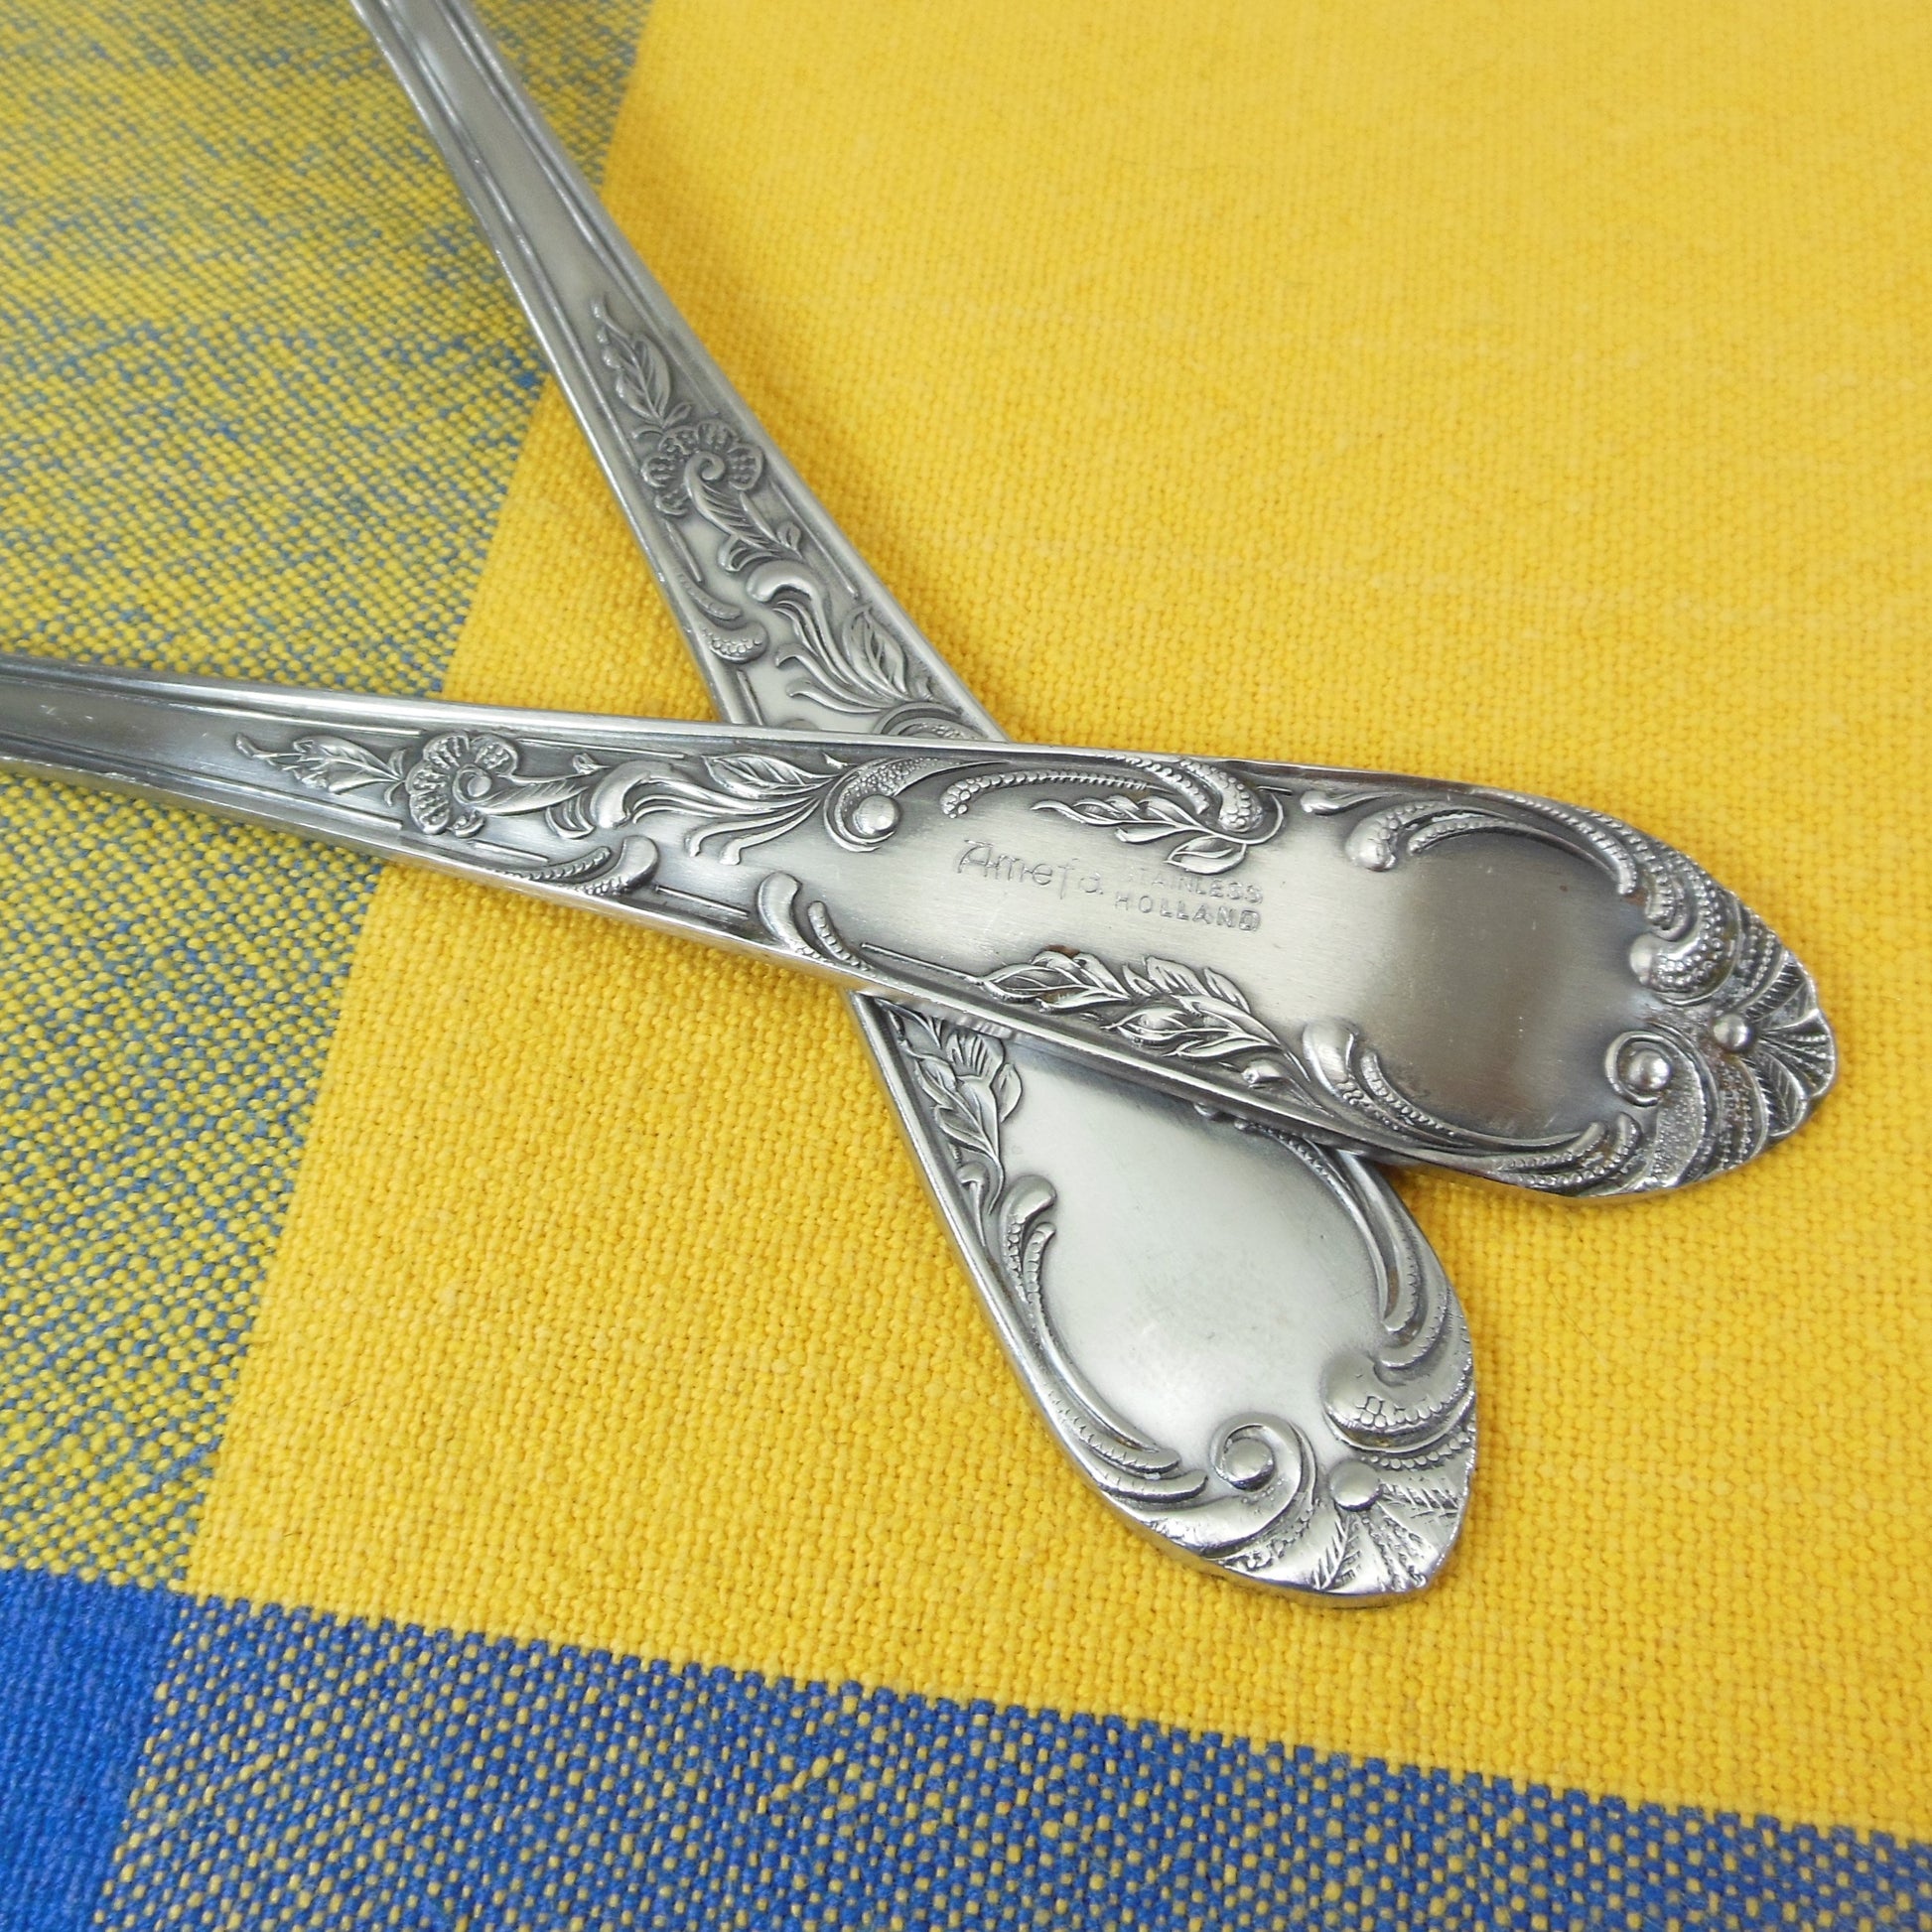 Amefa Holland AFS1 Stainless Flatware Scroll Handle - 2 Serving Spoons Vintage Used